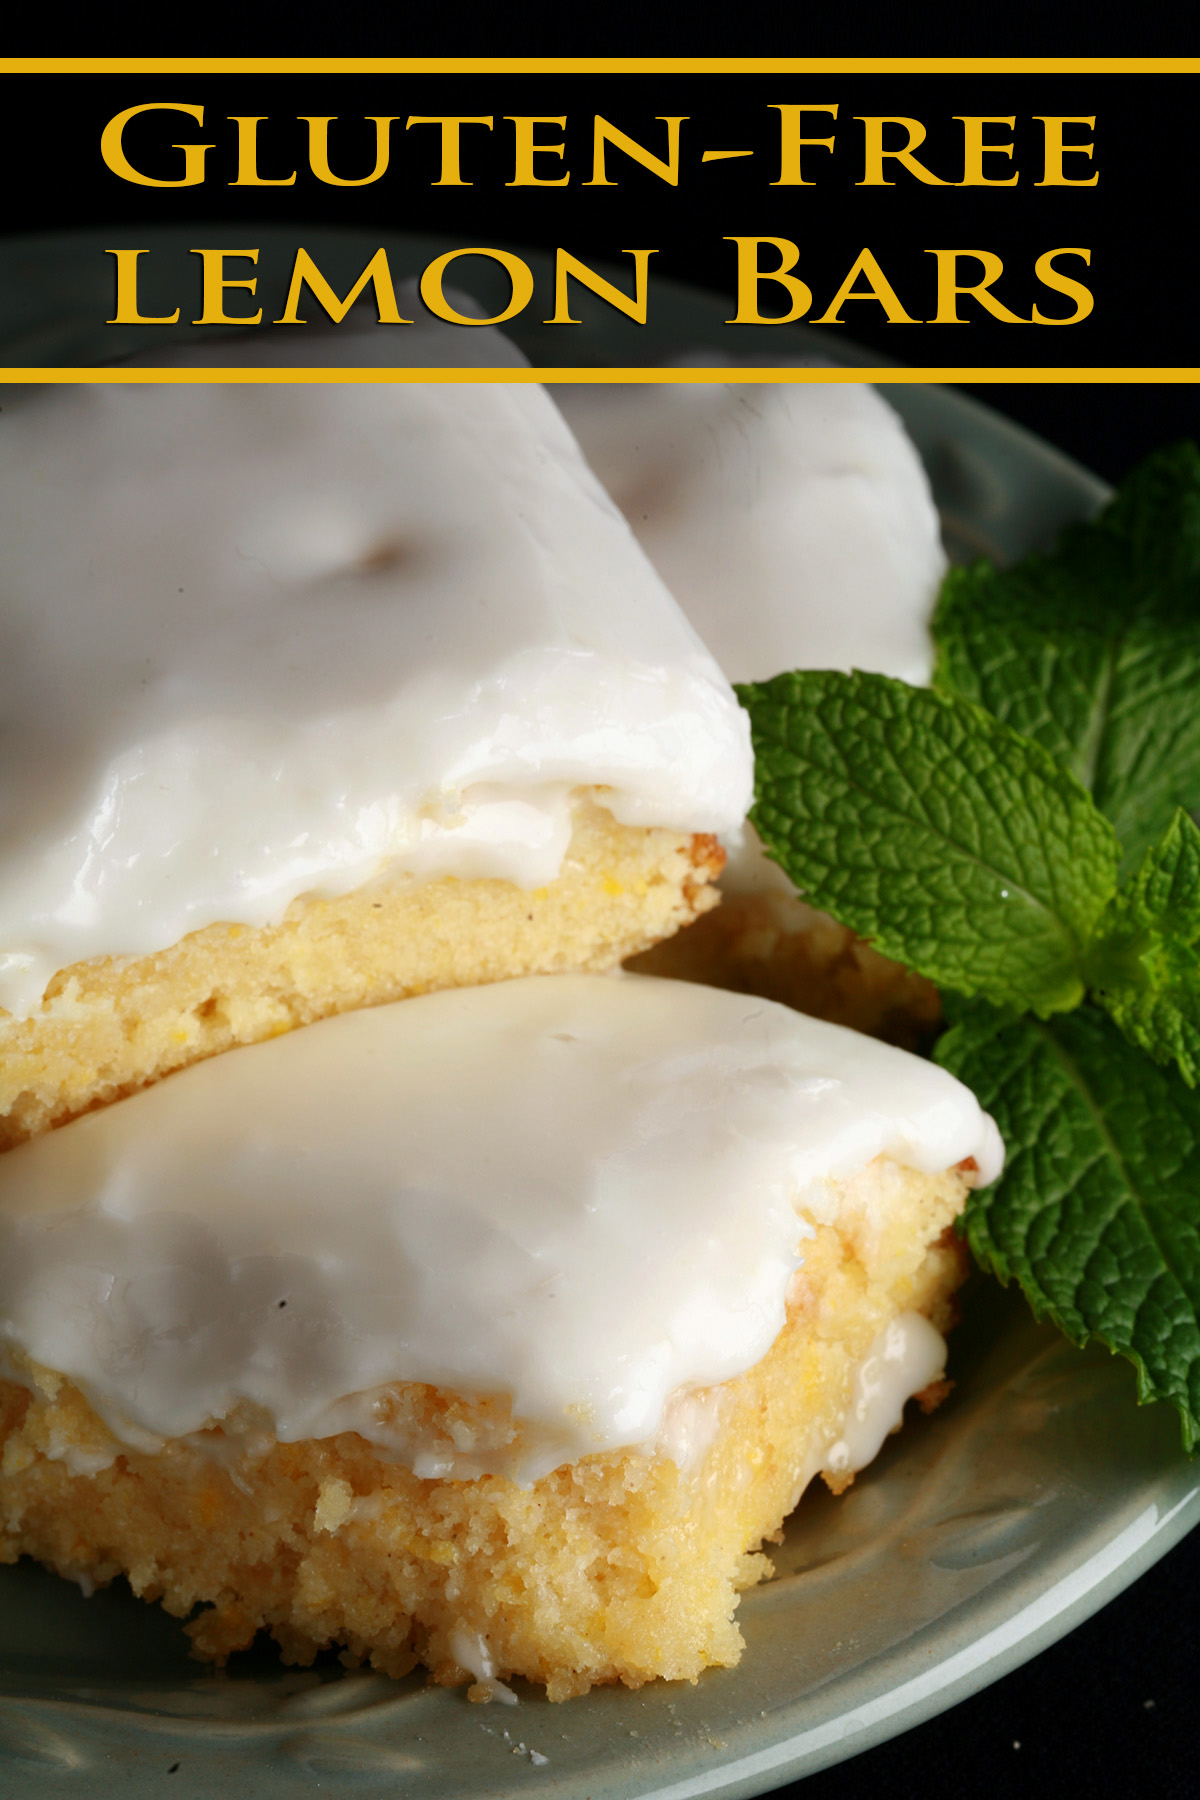 A plate of frosted gluten-free lemon bars, garnished with mint leaves.